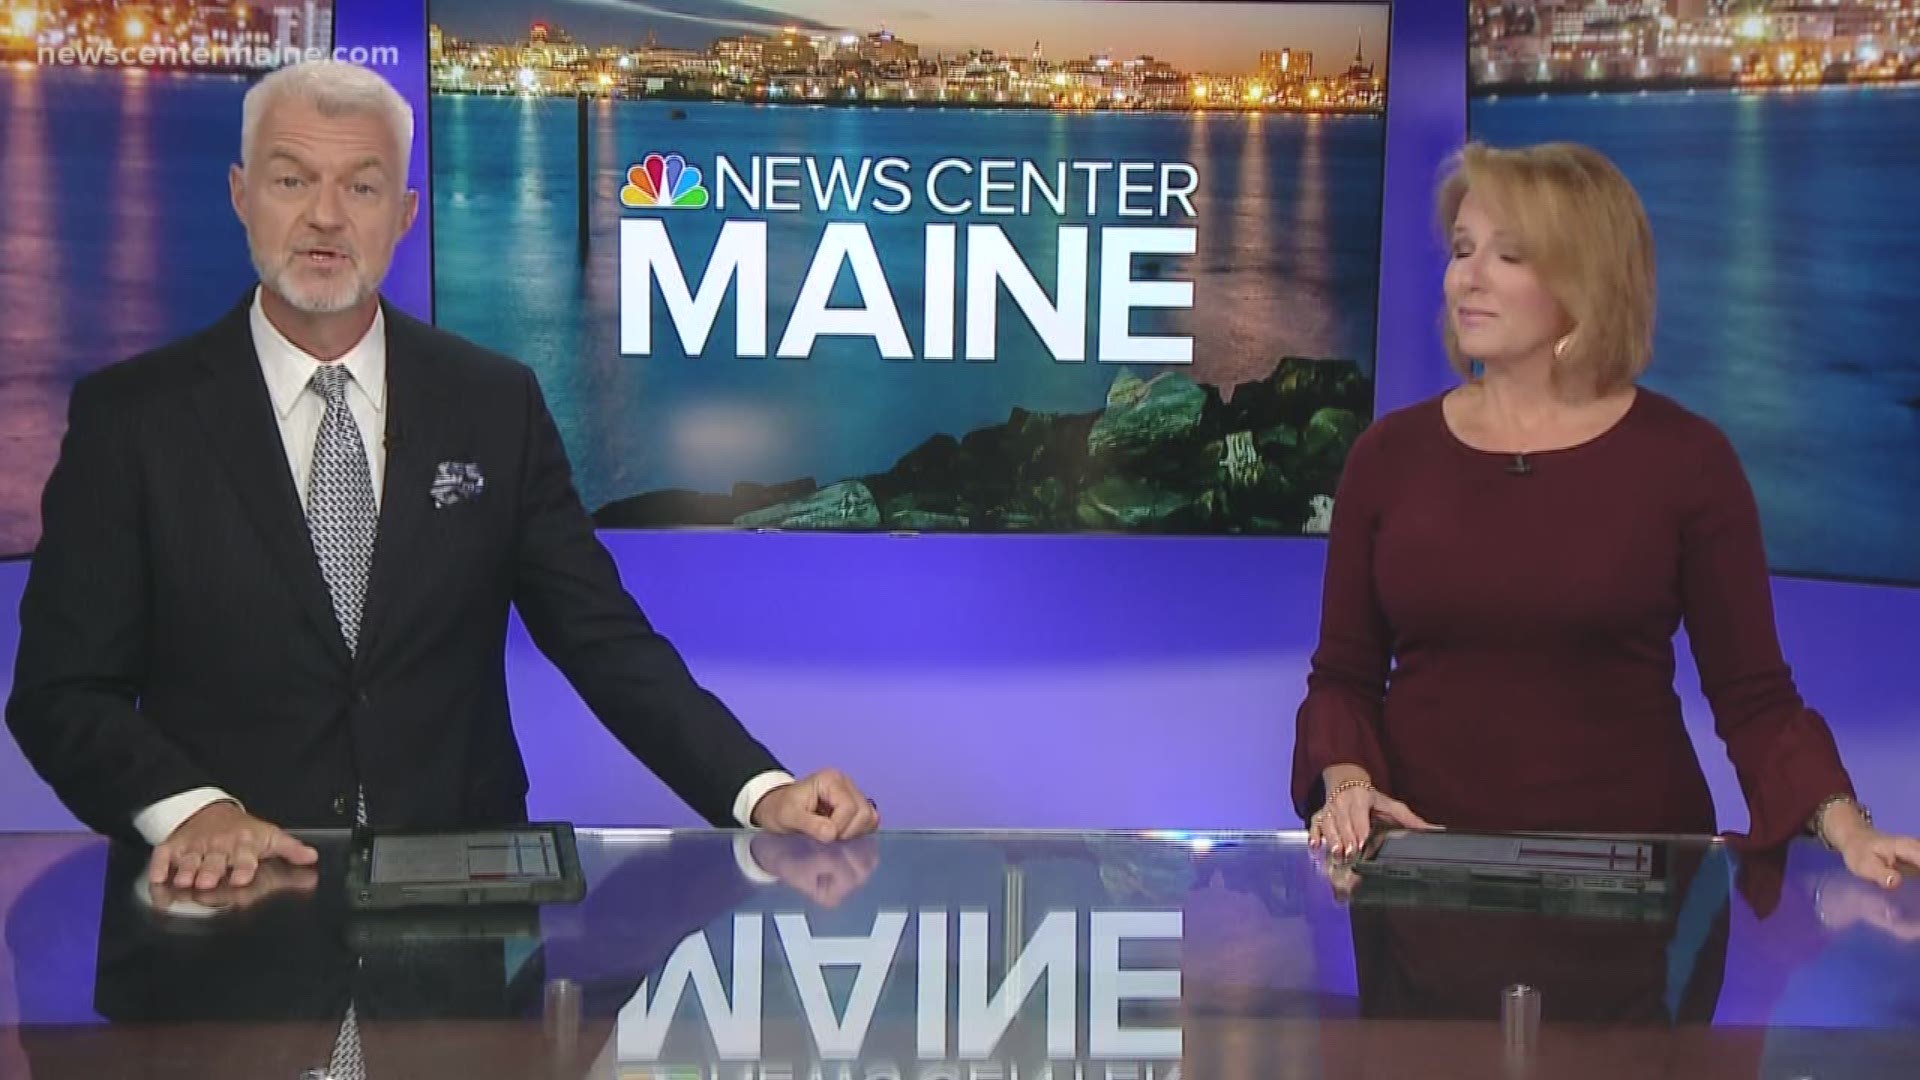 NEWS CENTER Maine temporarily goes off the air.